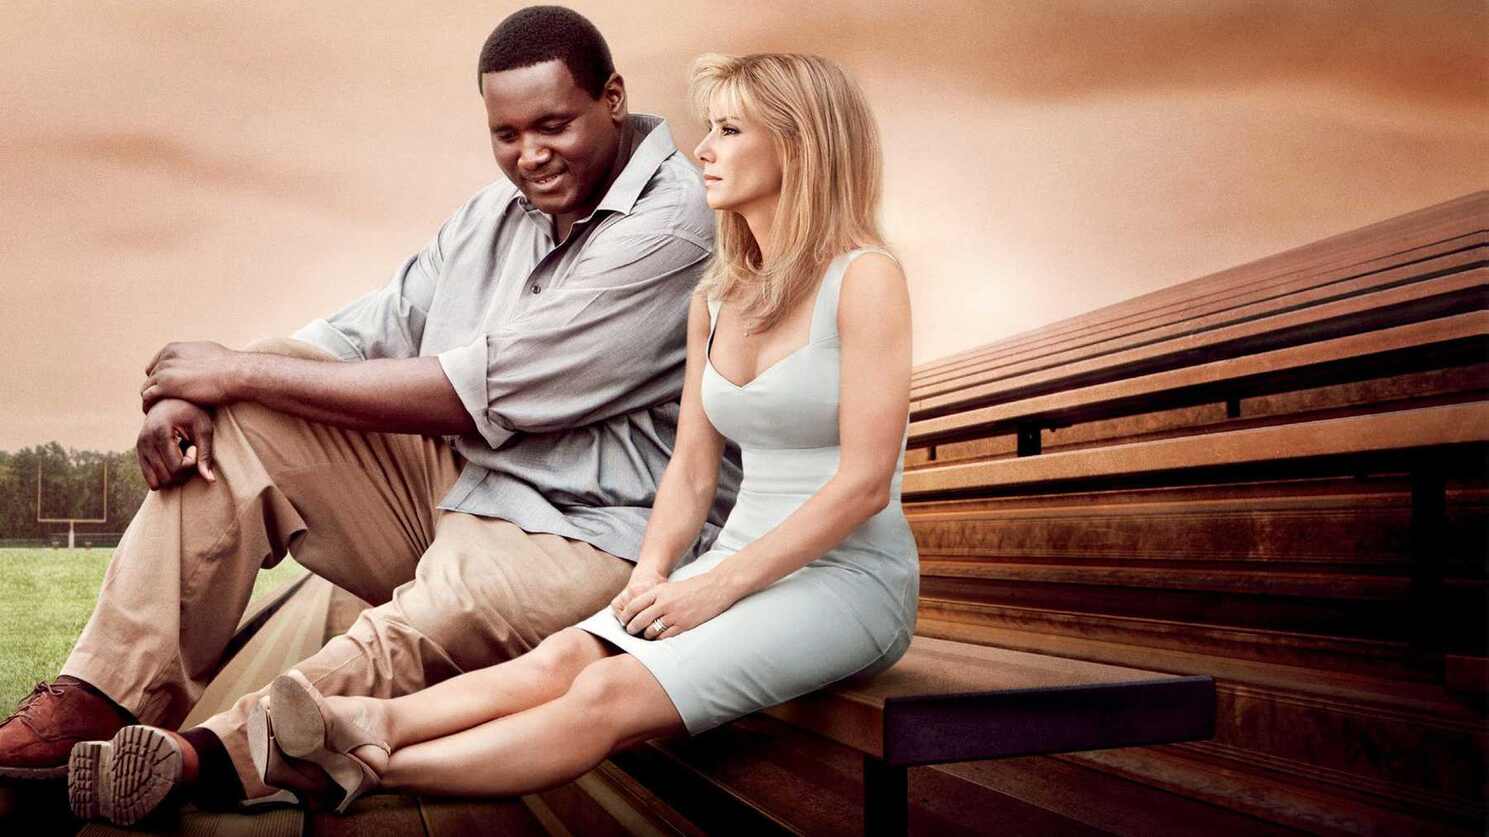 Movies Like The Blind Side